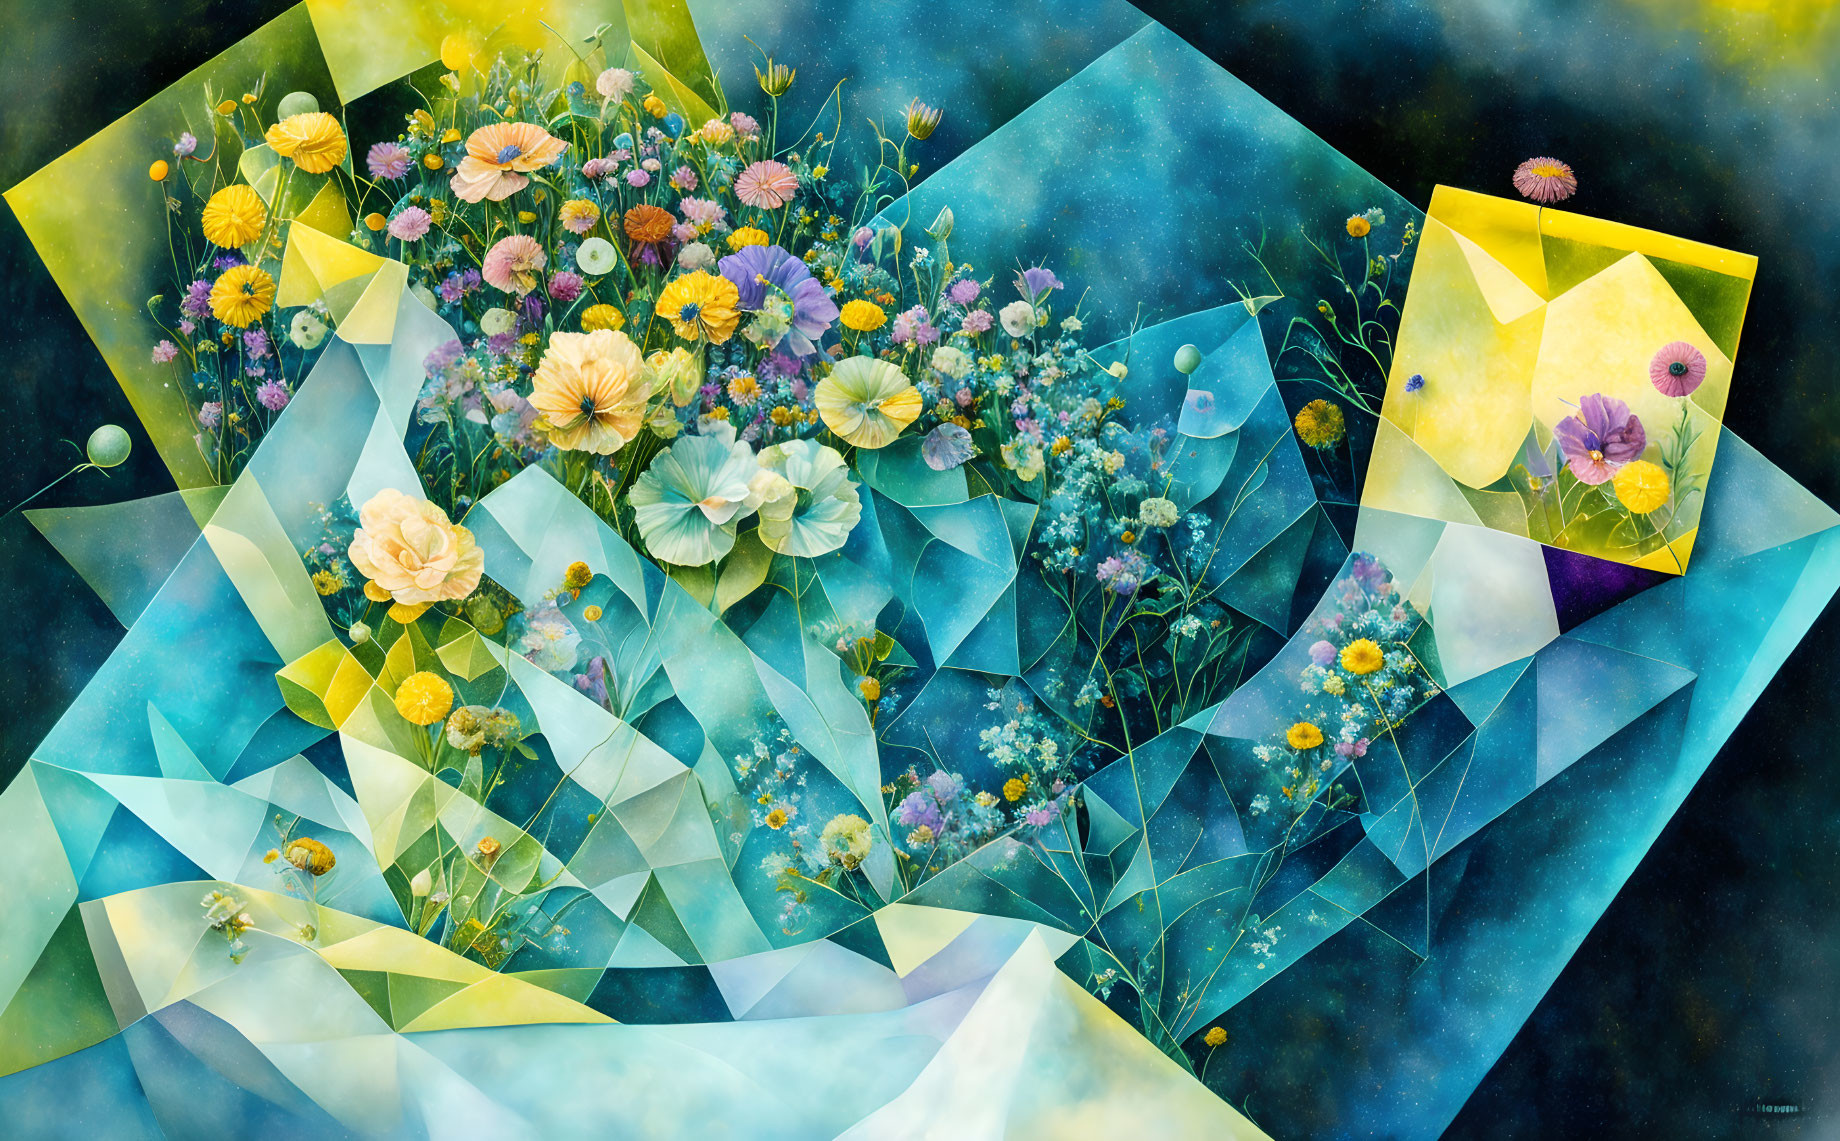 Colorful Abstract Painting: Flowers and Geometric Shapes in Blue and Yellow